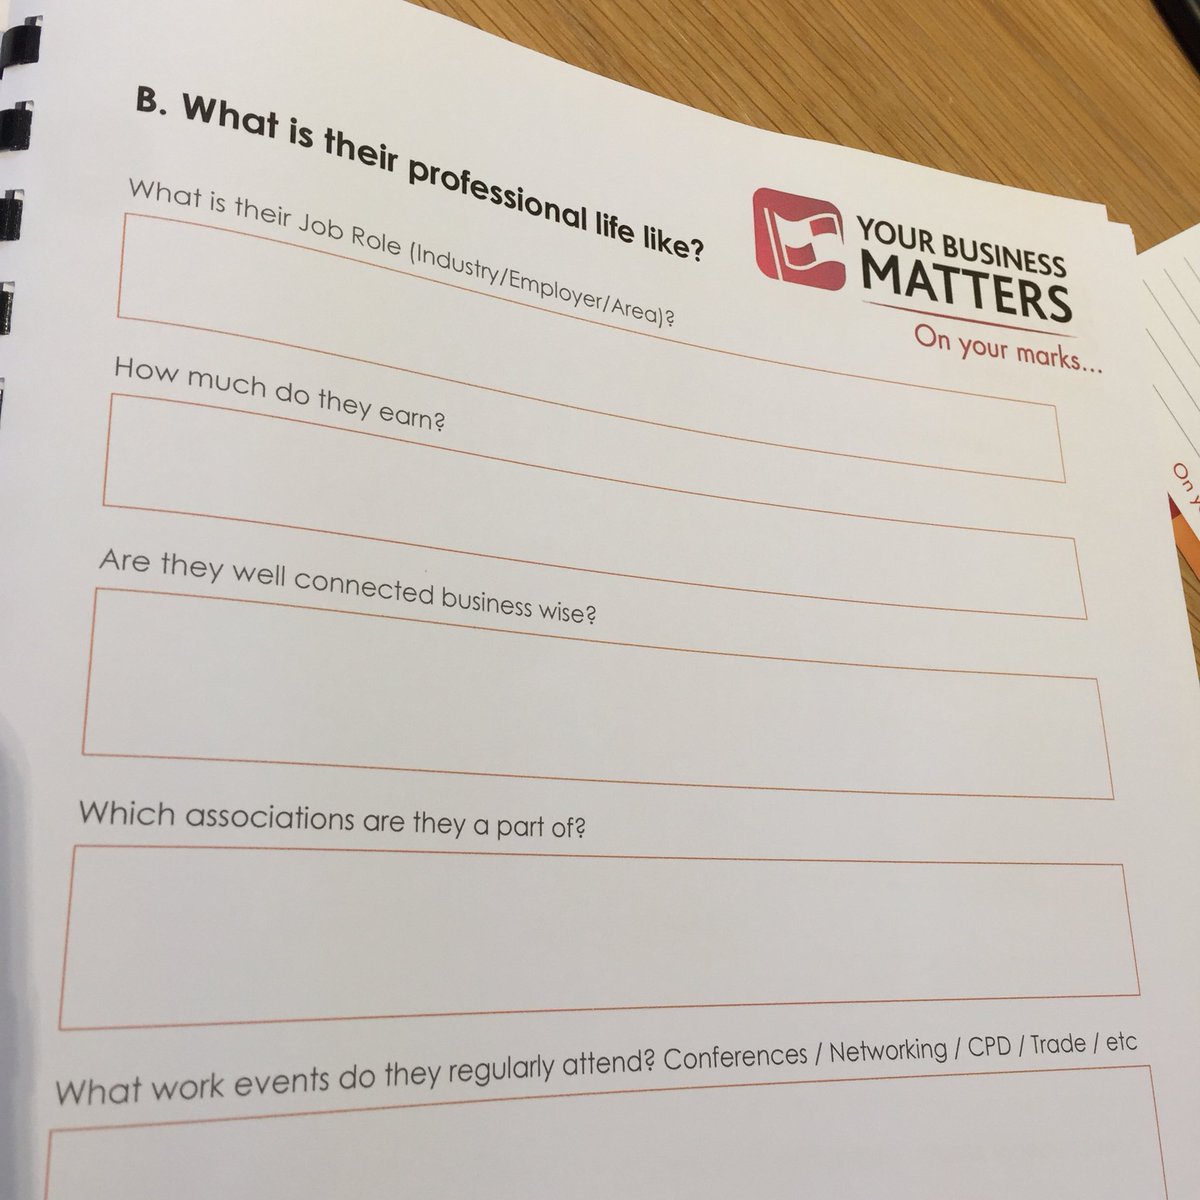 Enjoyed working with @barbaraWIBN @Rosie_J_Wright @ClaireHersant, Kate Brown & Claire Harrison today in the @YourBMatters Social Media Strategy session. They powered through some tough questions! Thank you @KetteringPark #HardWorkPaysOff #FailToPlanPlanToFail #targetcustomer